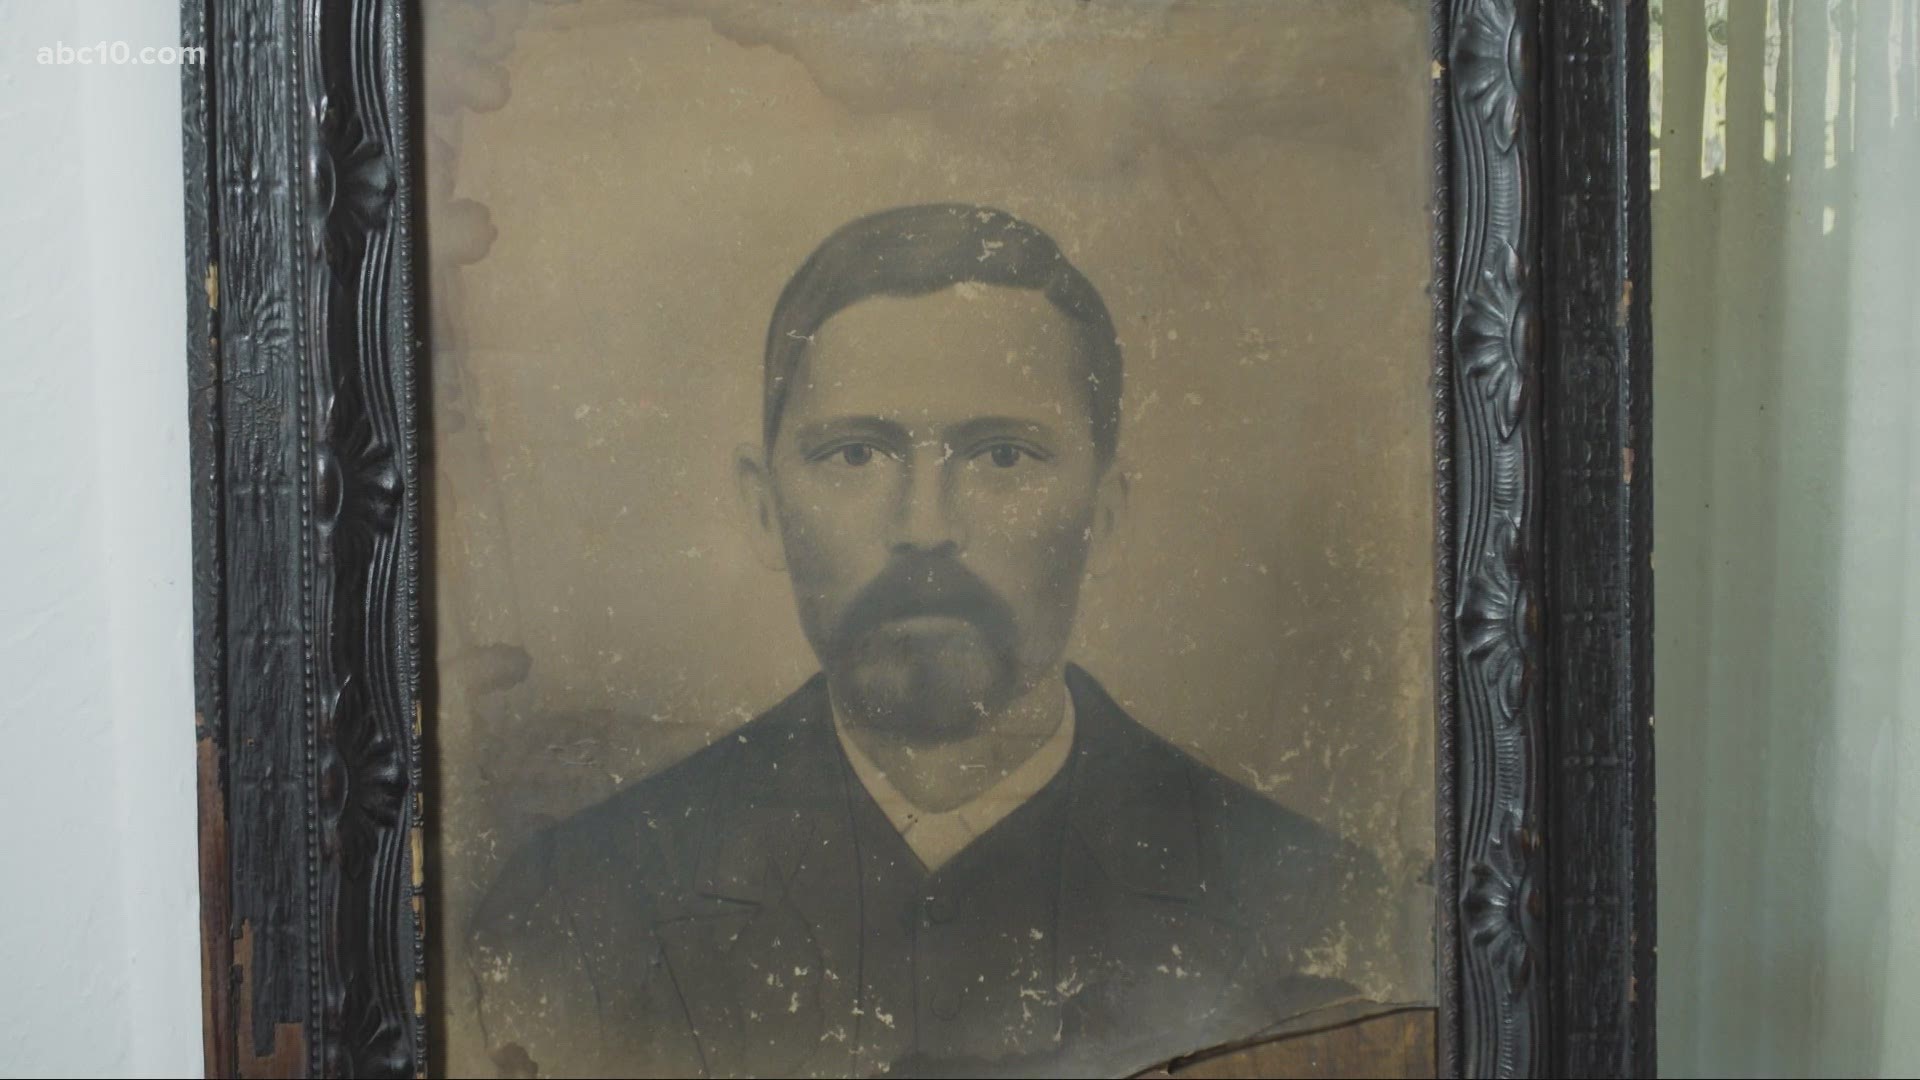 A Sacramento family shares how they found their connection to the former slave Peter Hunt.